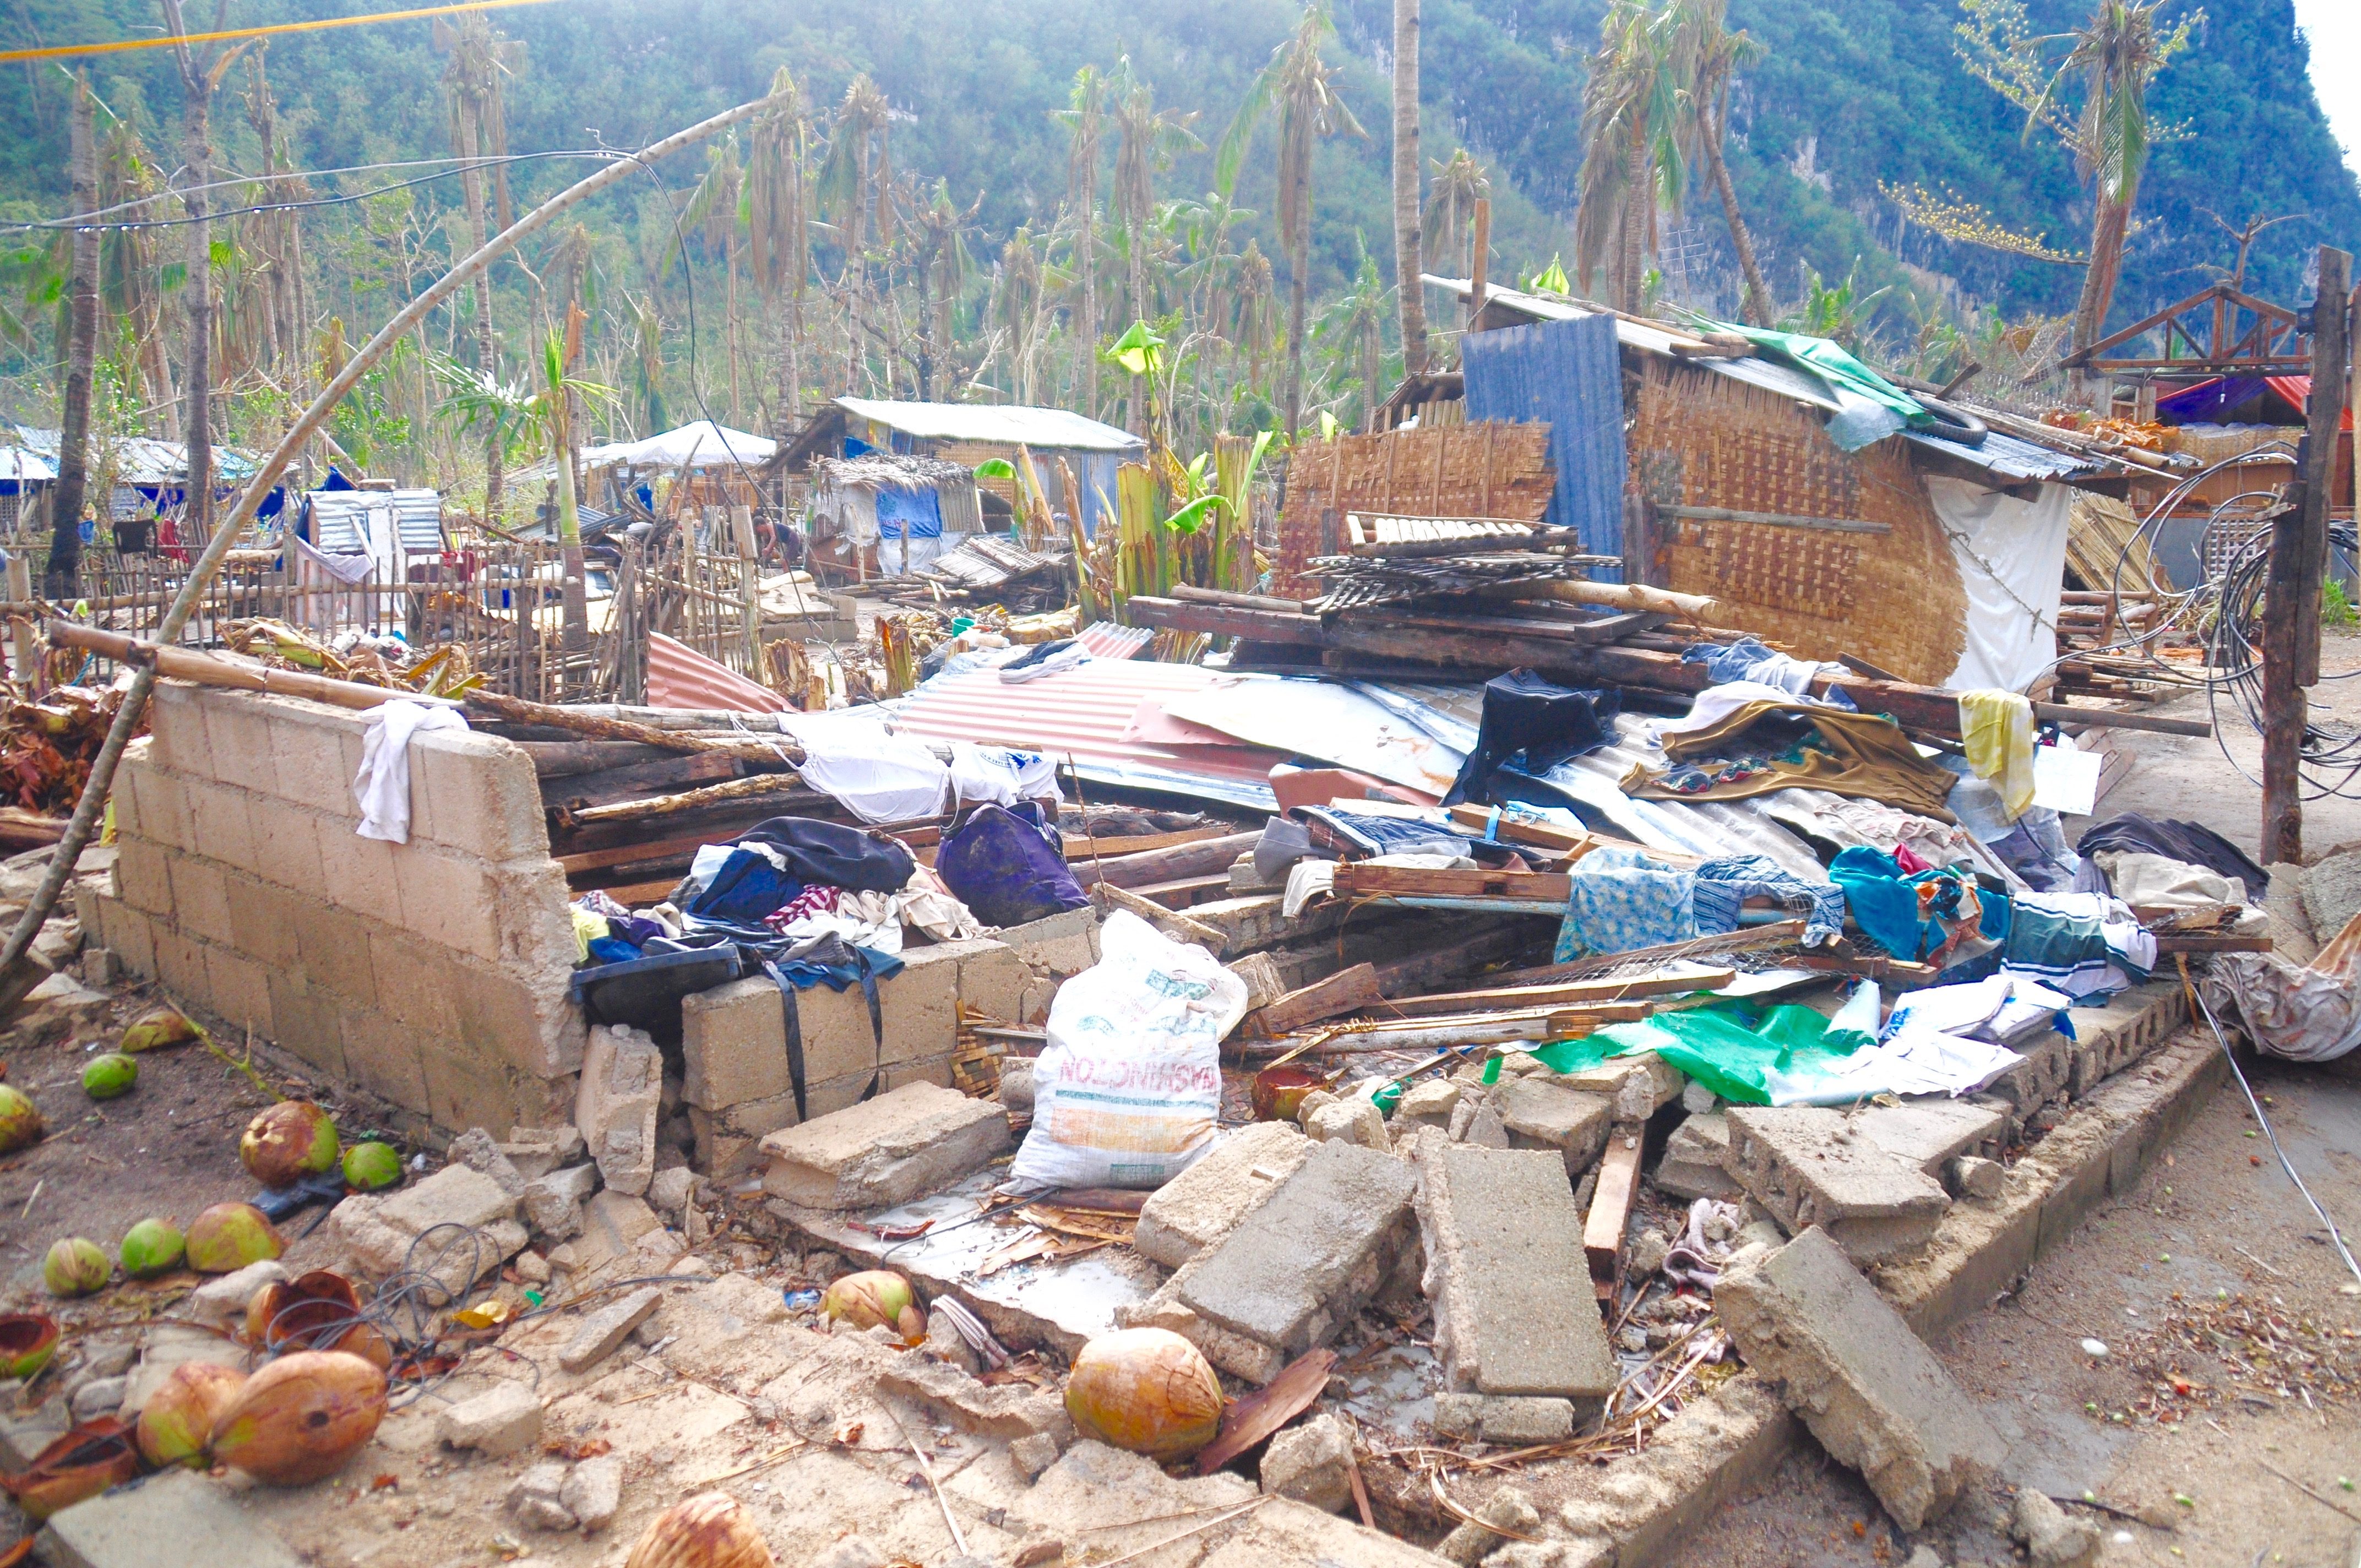 YOLANDA'S WRATH. The storm surge and strong winds resulted to destruction of properties, the natural environment, fishing implements and disruption of people’s livelihoods 